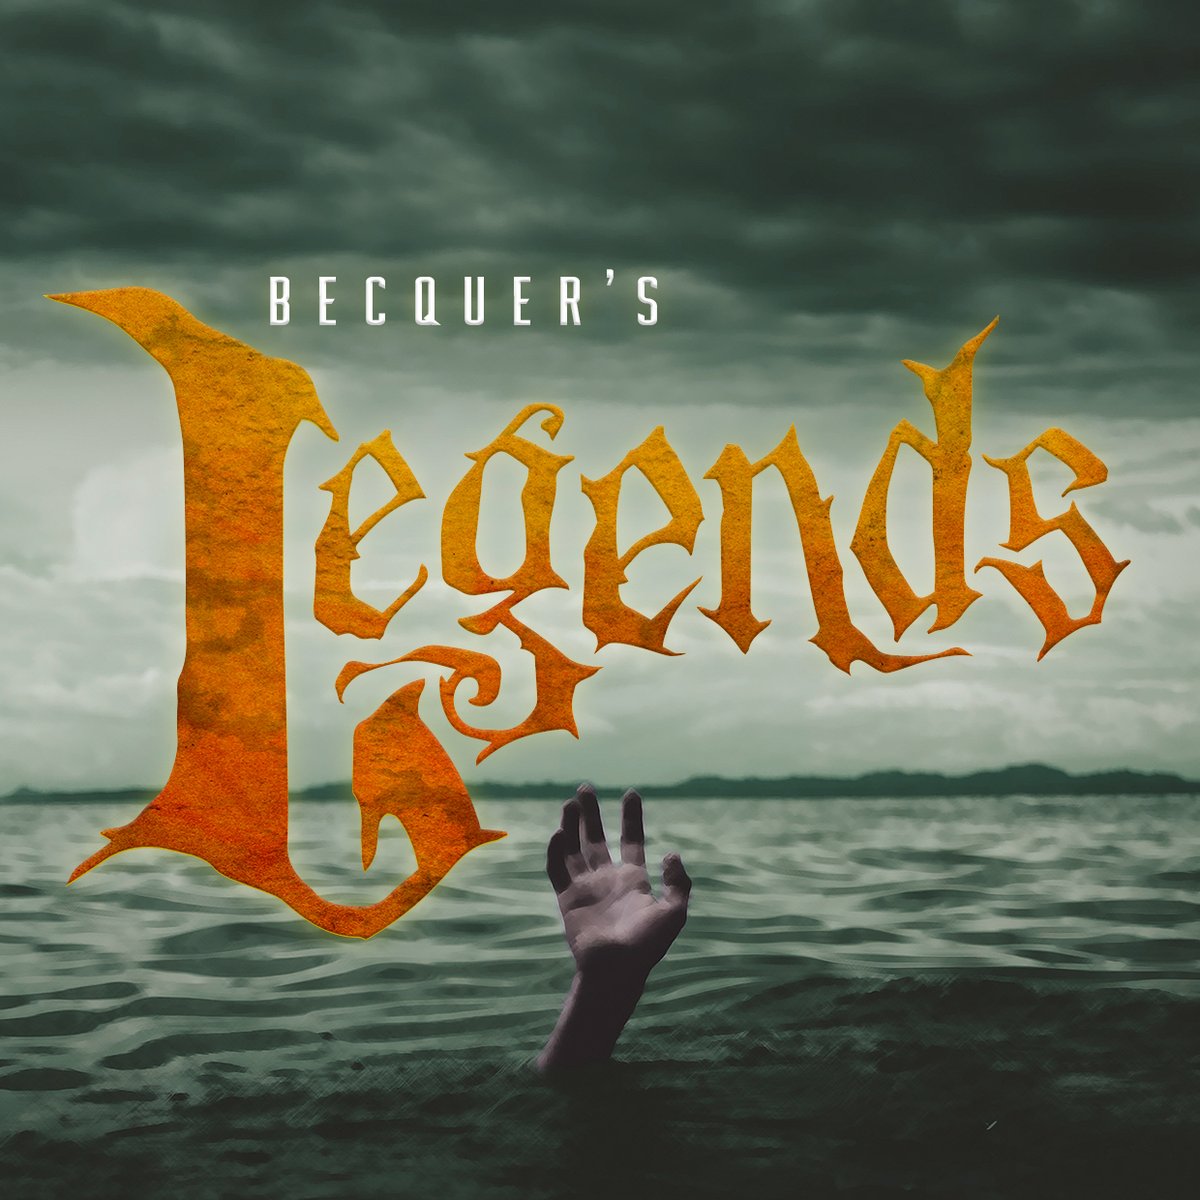 OPEN CASTING CALL!
We are holding auditions for 'Becquer's Legends', a new Gothic show debuting at the @EdHorrorFest.

You can find all the information you need about the show in our audition pack: tinyurl.com/zyhv5zds

#EdinburghTheatre #TheatreAuditions #TheShowMustGoOn